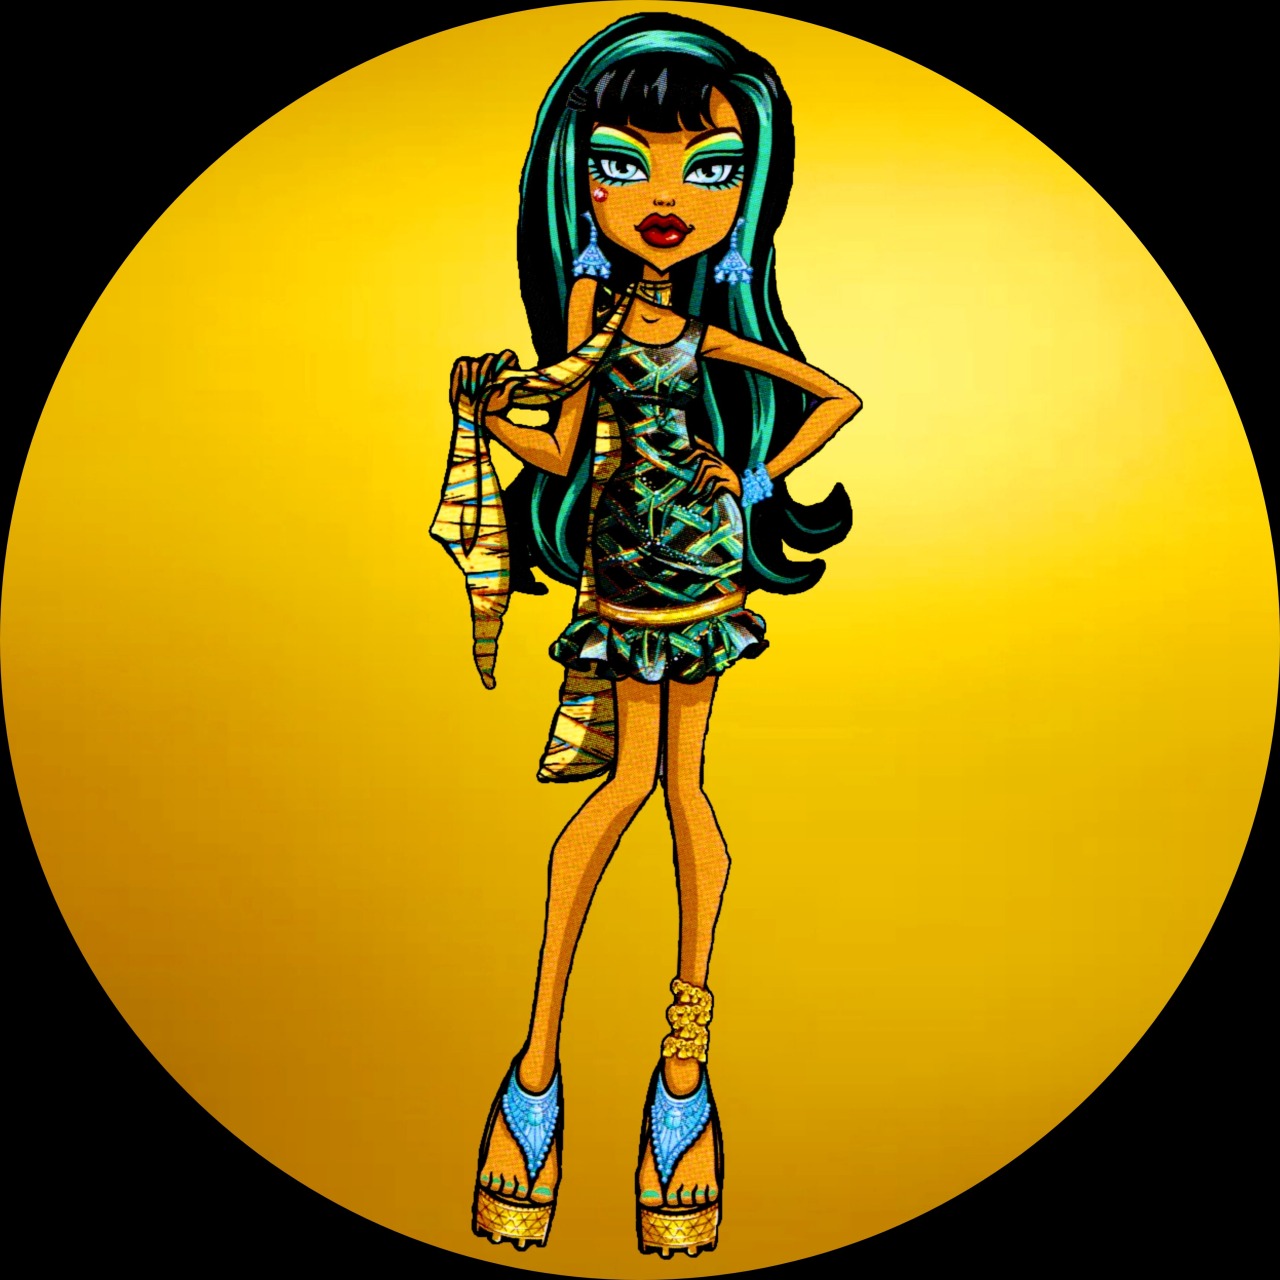 Monster High IconsLike and/or reblog if you save/use #monster high #scaris: city of frights  #cleo de nile #lagoona blue#sparkly#glitter#icons#circle icons #icons by me